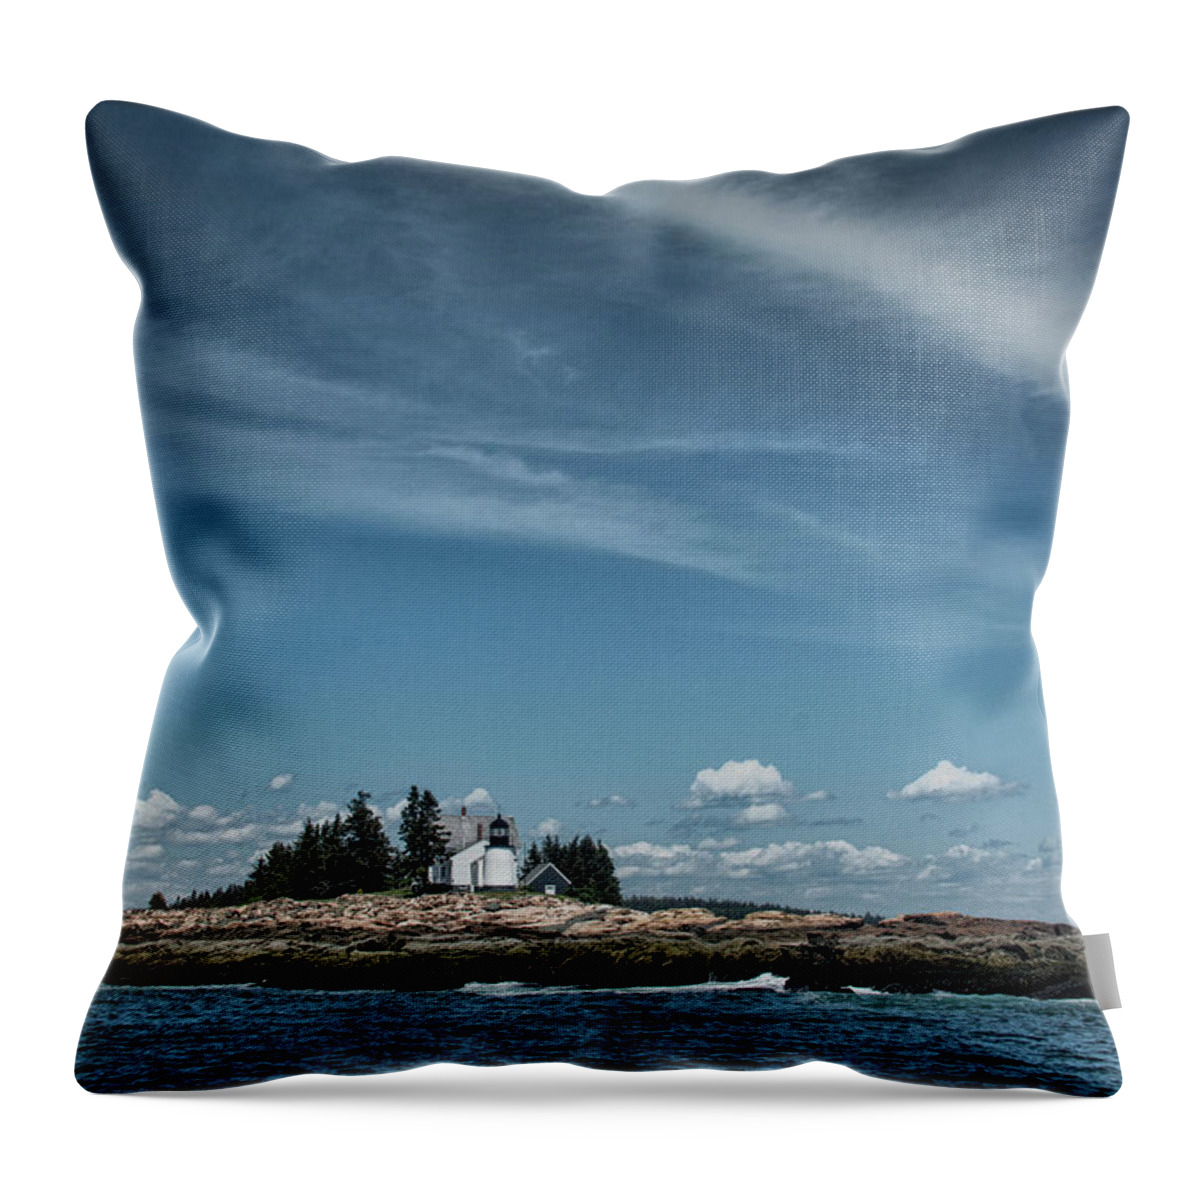 Sea Throw Pillow featuring the photograph Winter Harbor by Erika Fawcett